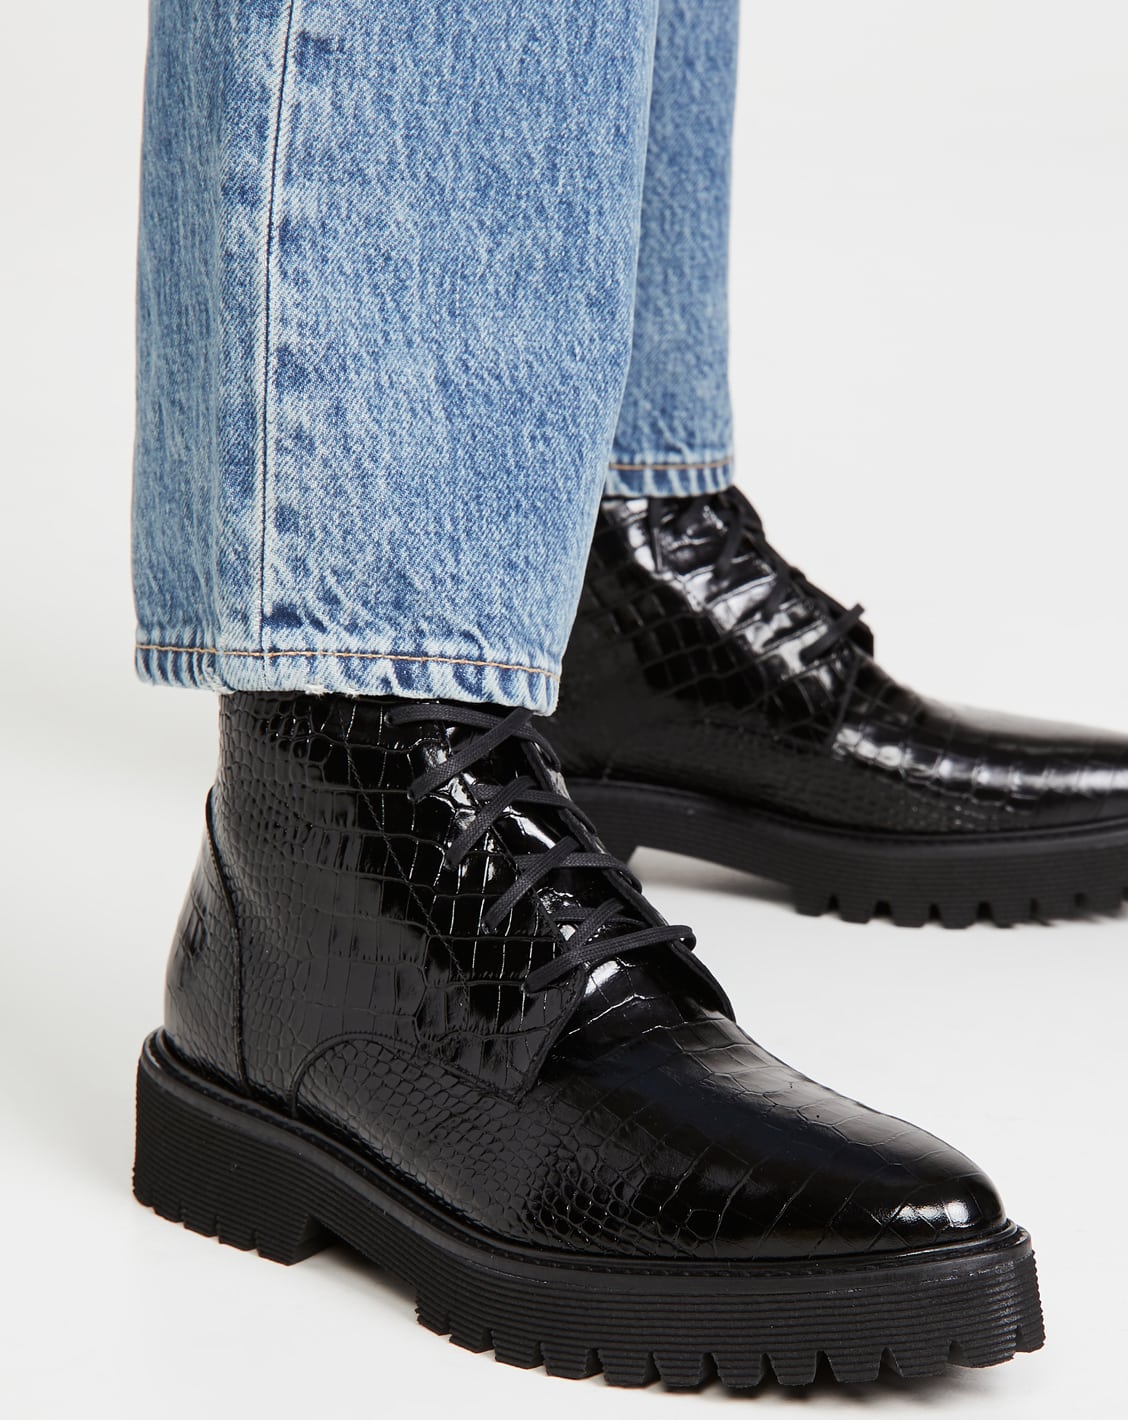 The Emi boot from California-based brand Freda Salvador features a croc-effect leather upper and a rubber lug sole